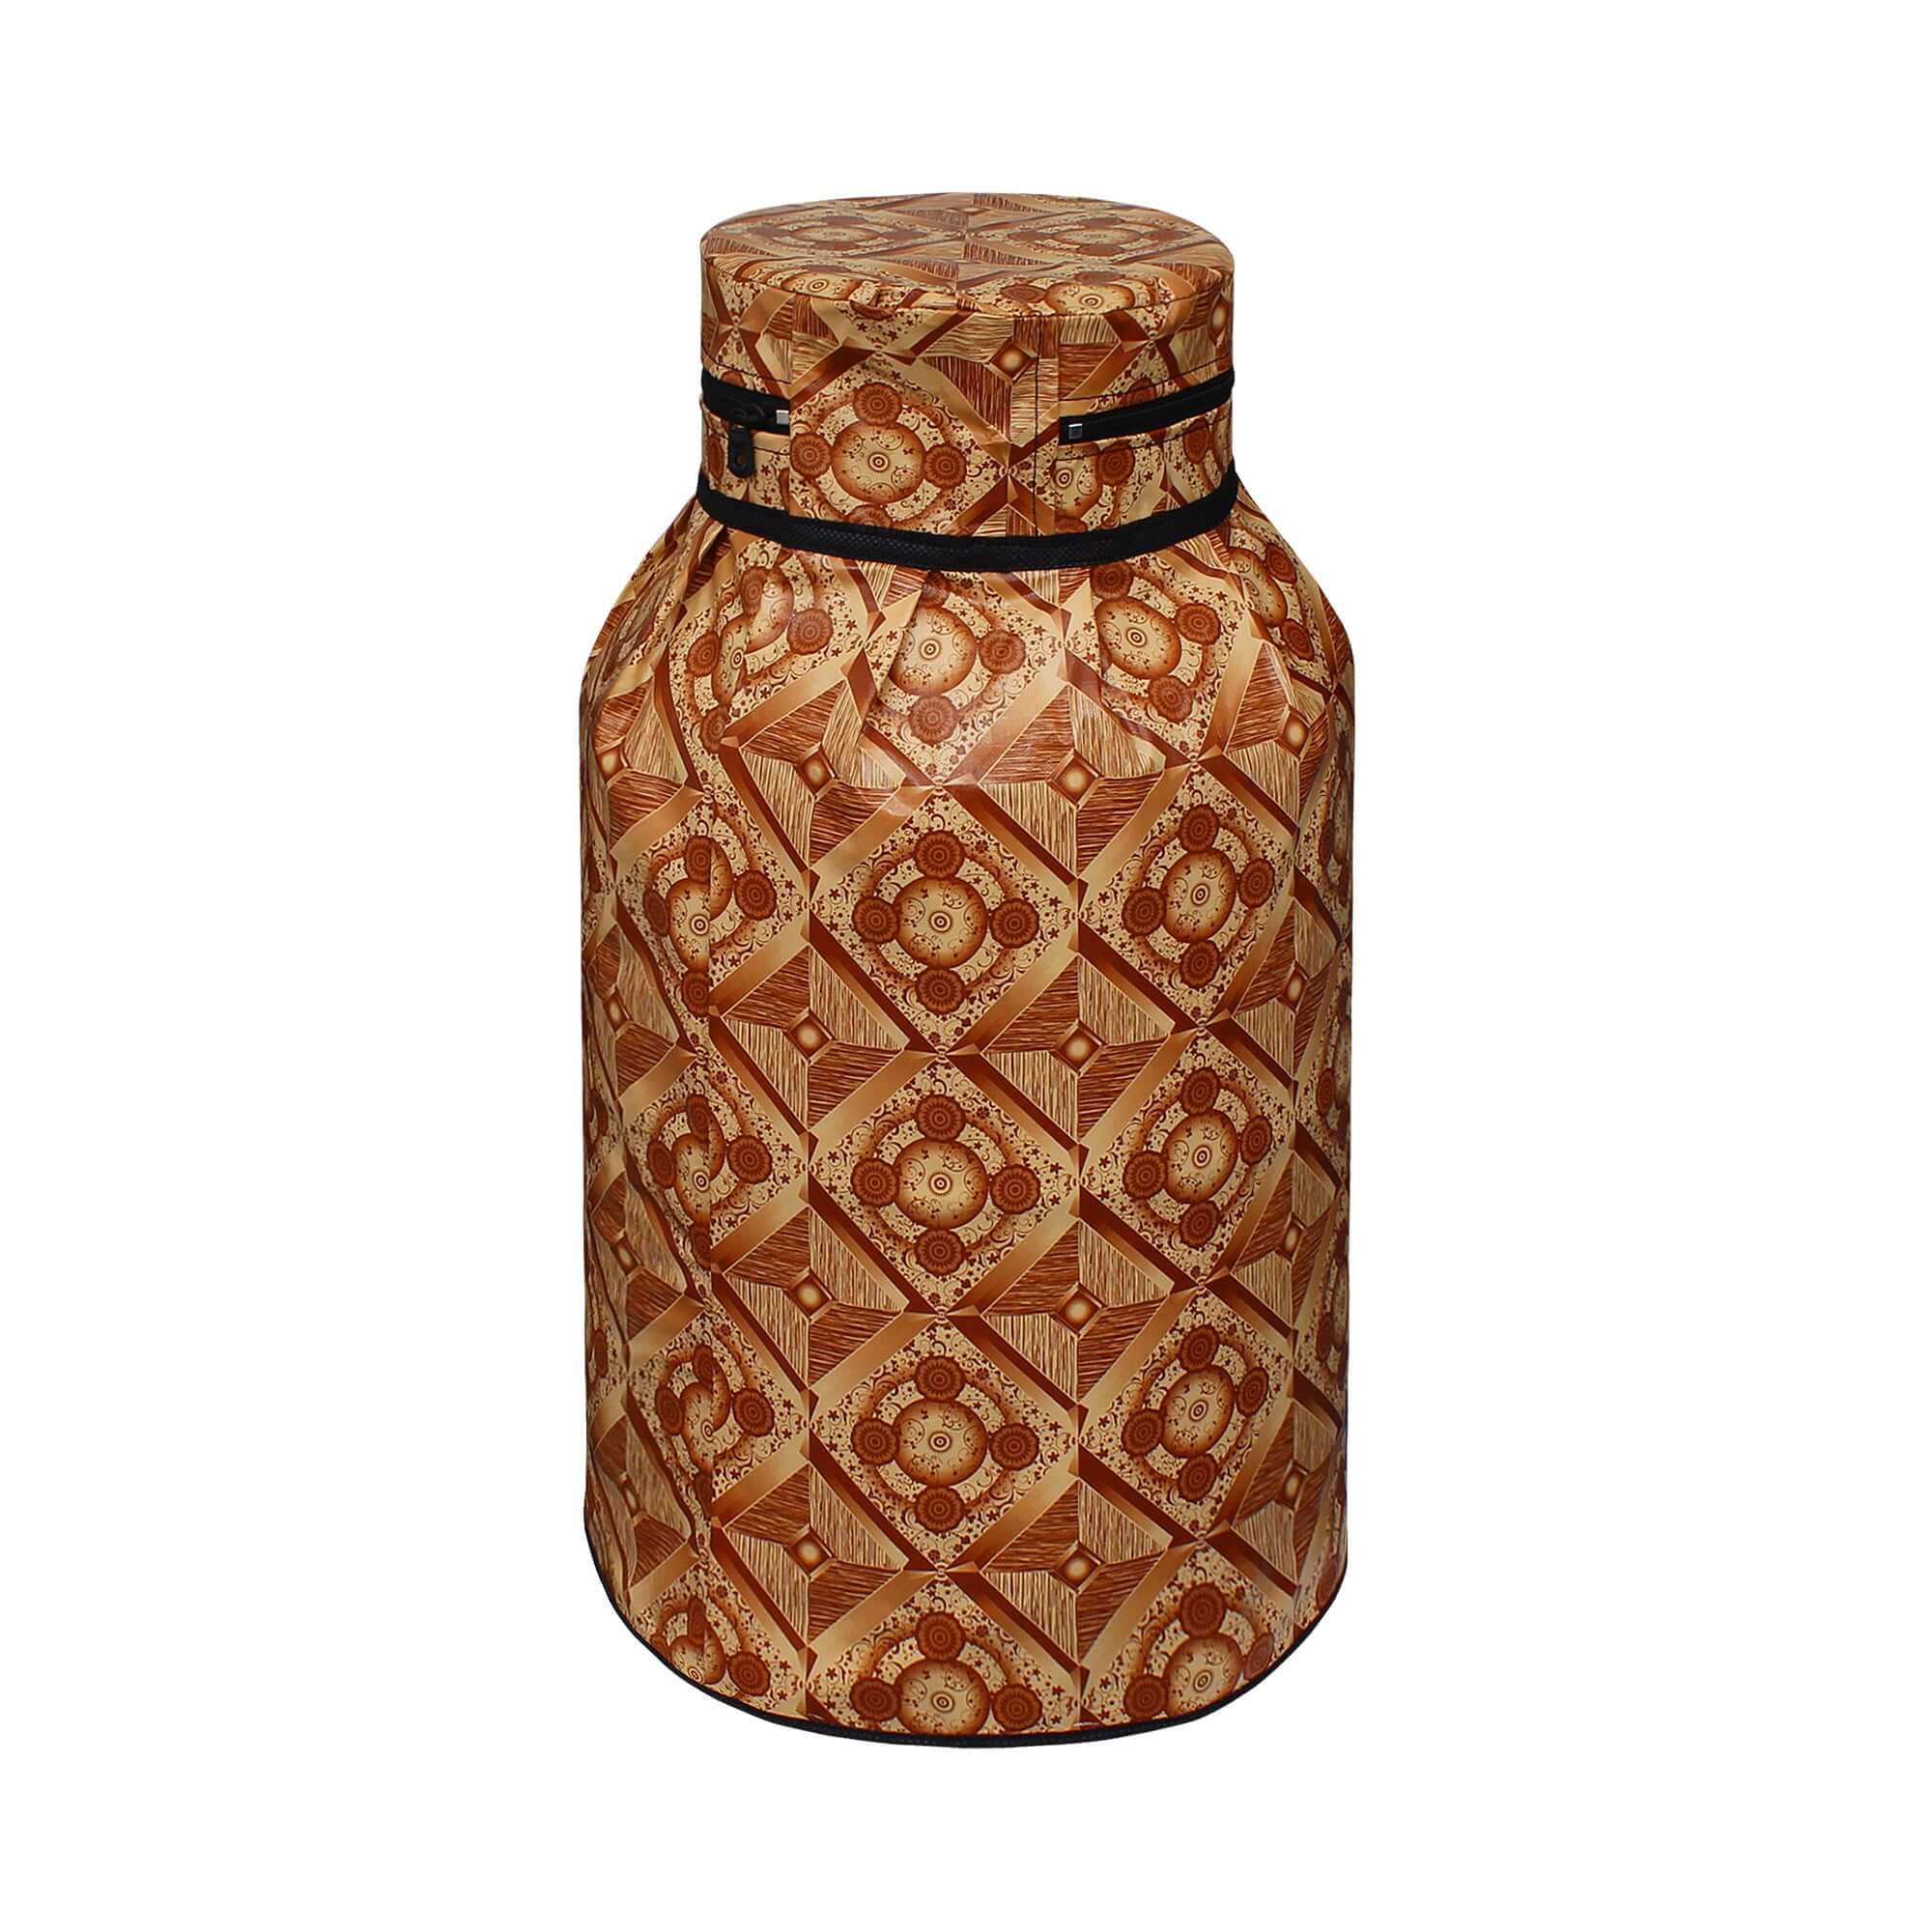 LPG Gas Cylinder Cover, SA54 - Dream Care Furnishings Private Limited